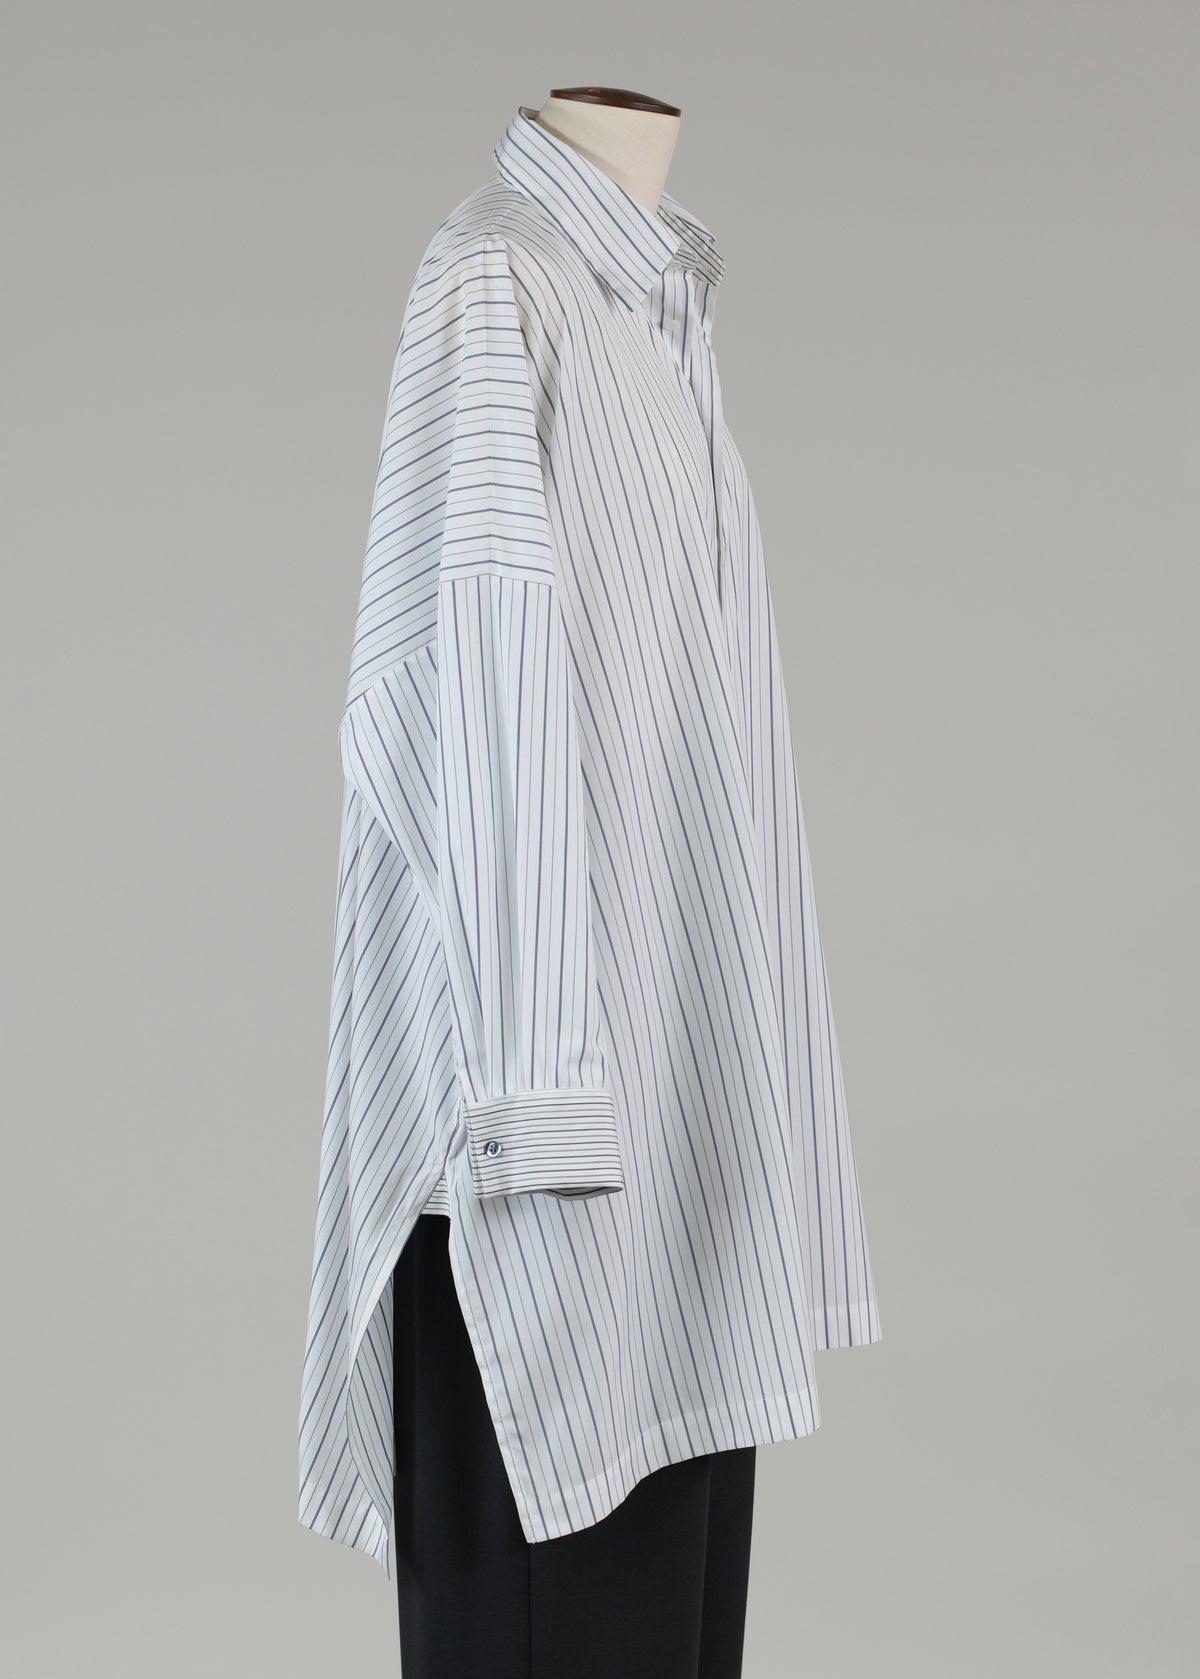 wide longer back shirt with collar and fold cuff - very long with slit